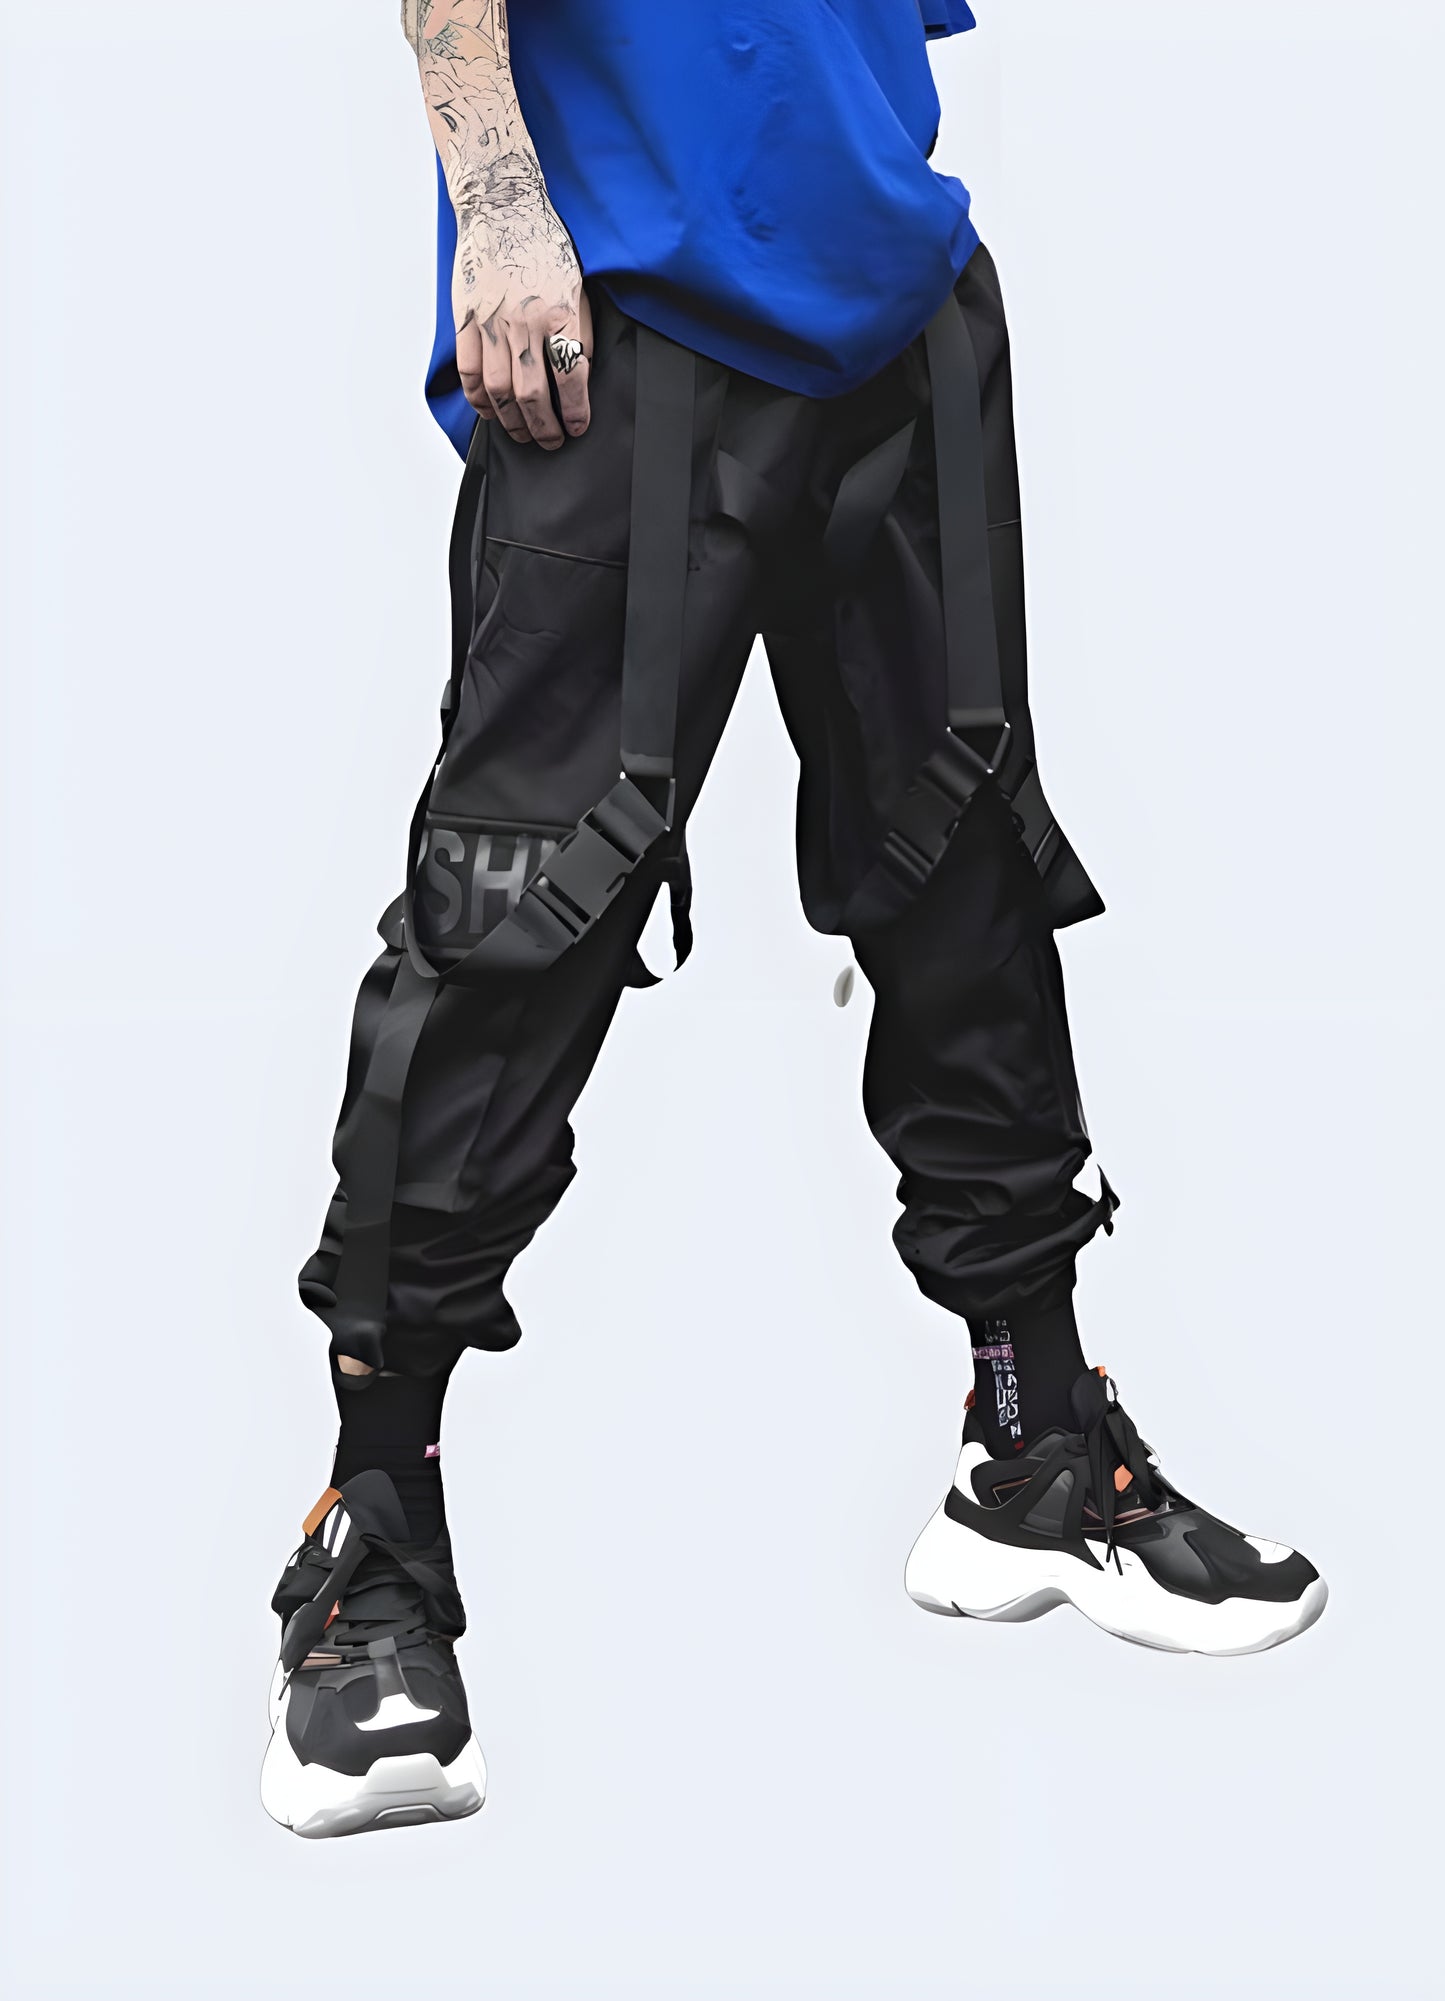 Multiple pockets and zippers on the side black jogger cargo pants.